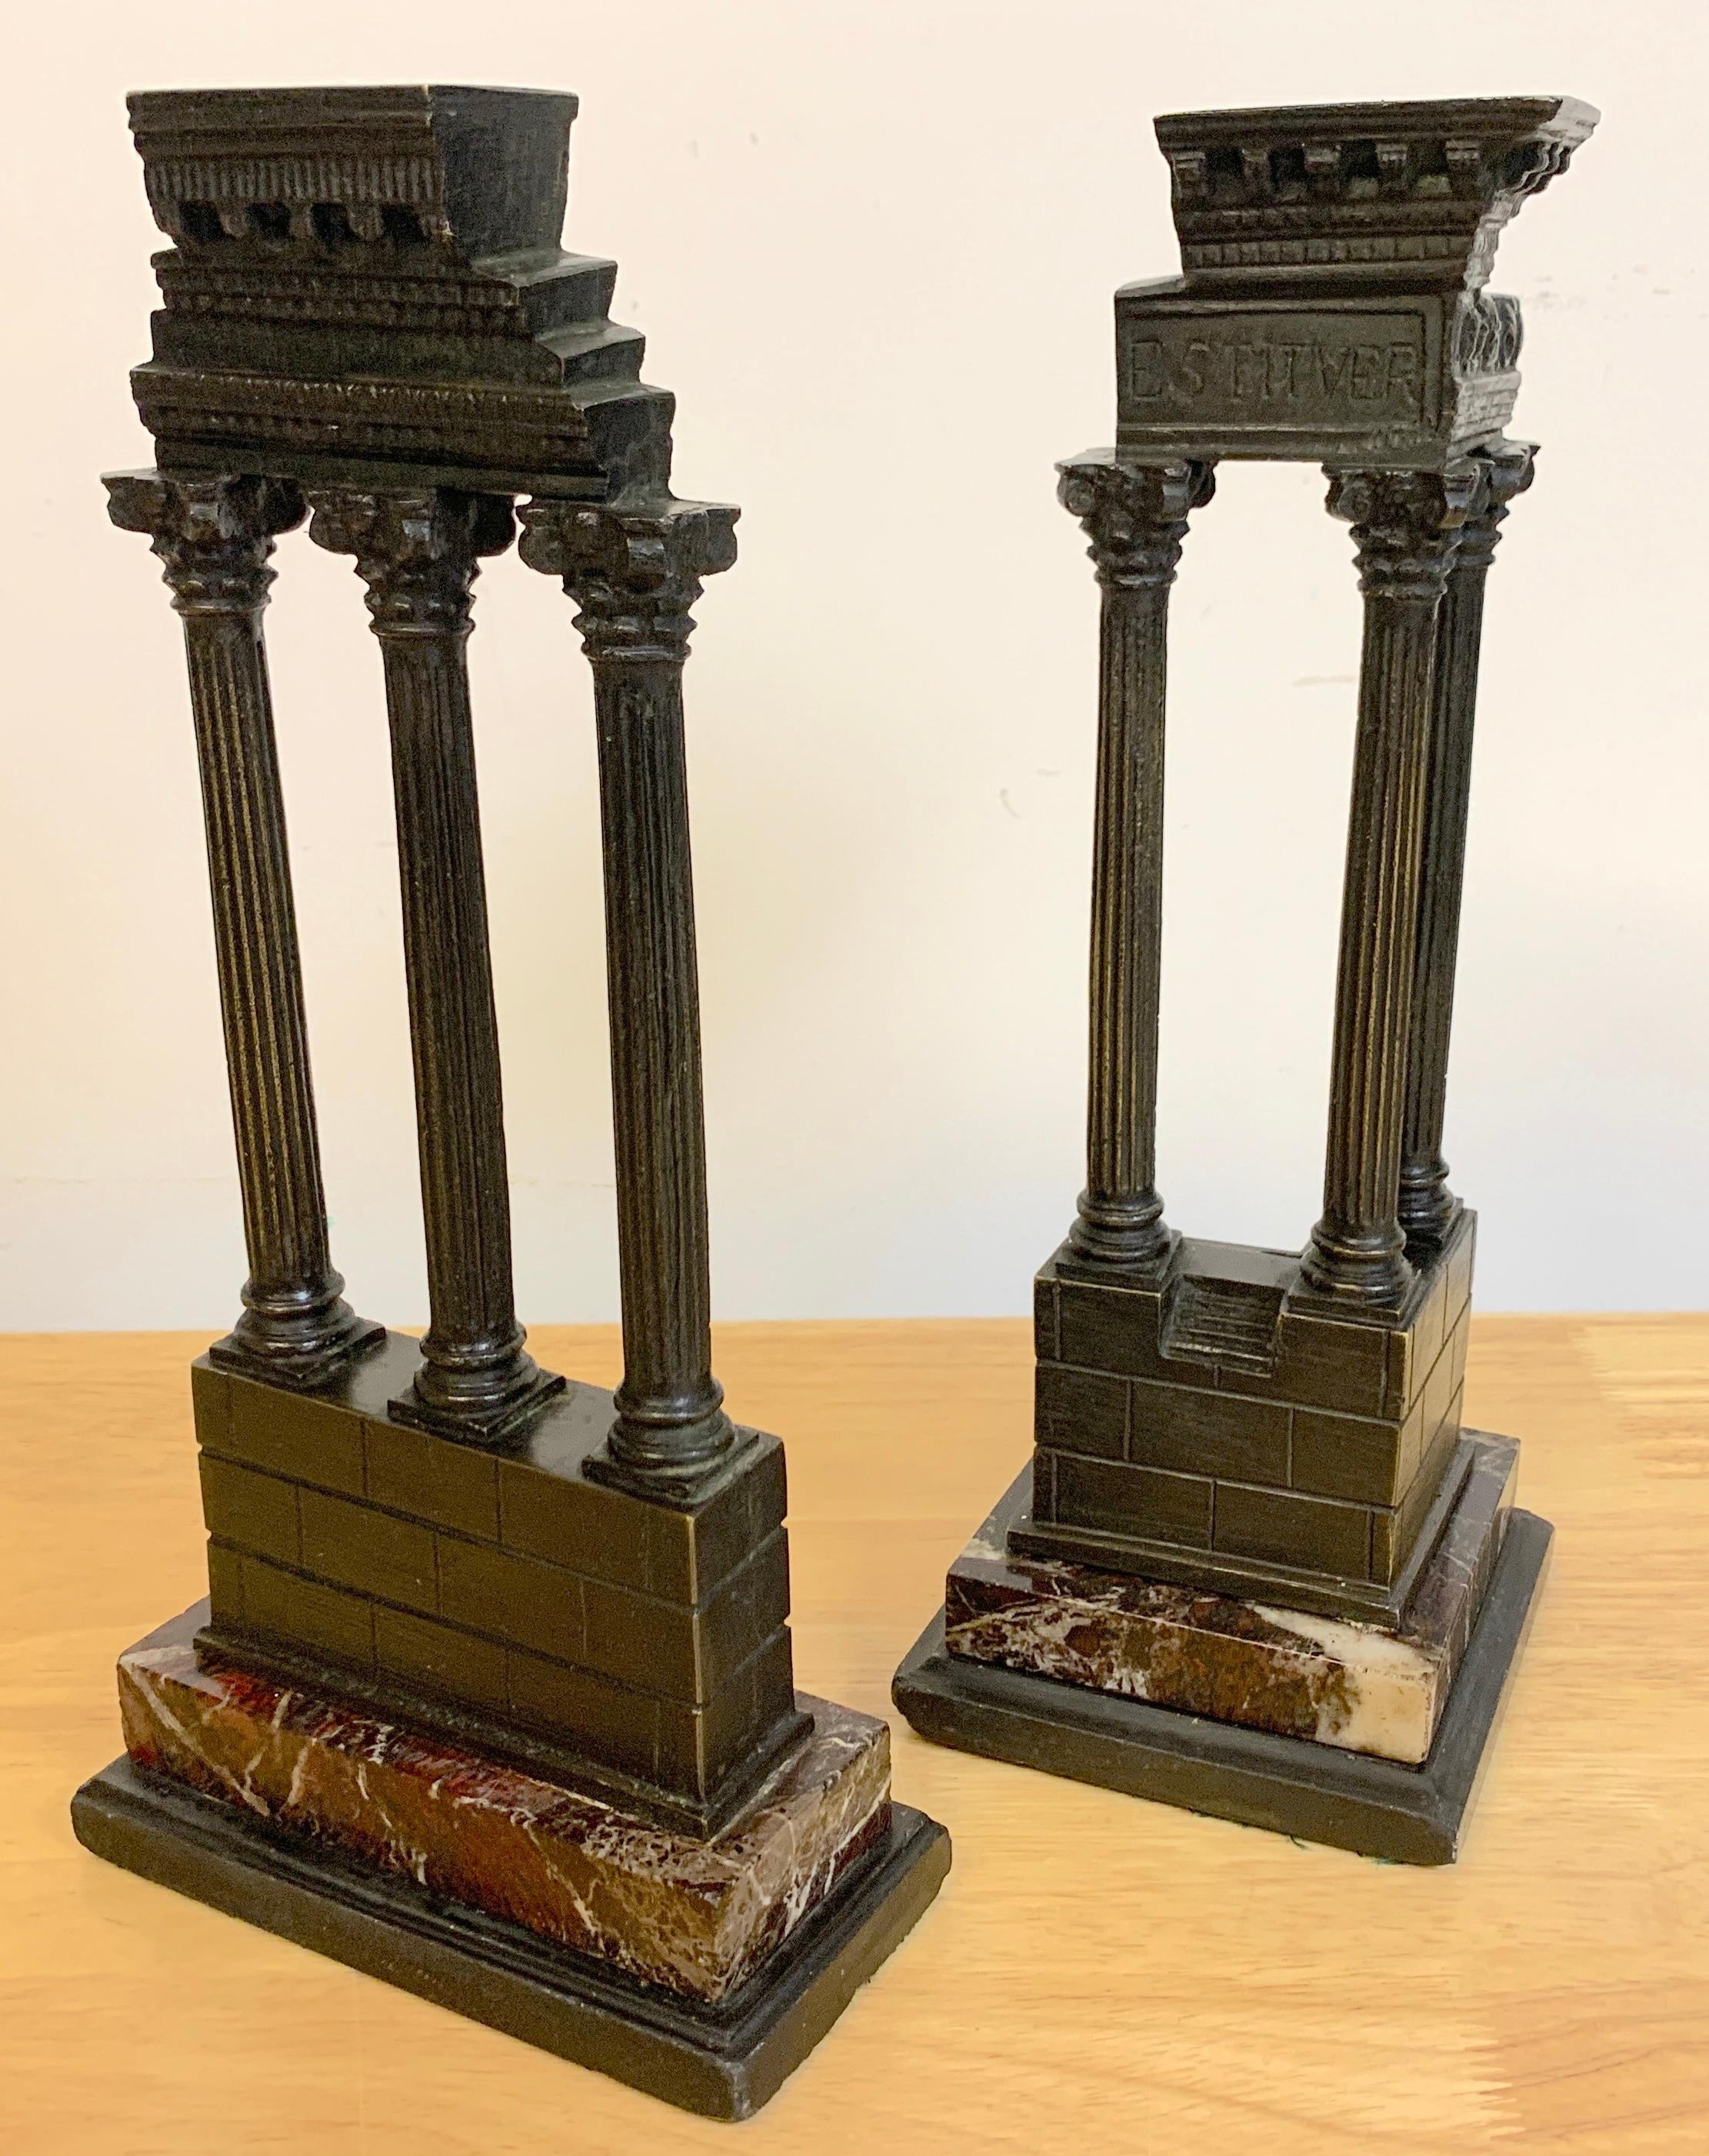 19th century Grand Tour bronze models roman forum columns, depicting the temple of castor and Pollux and the temple of Vespasian from the Roman Forum, raised on rouge marble bases.
Measures: Temple of castor and Pollux 5.75